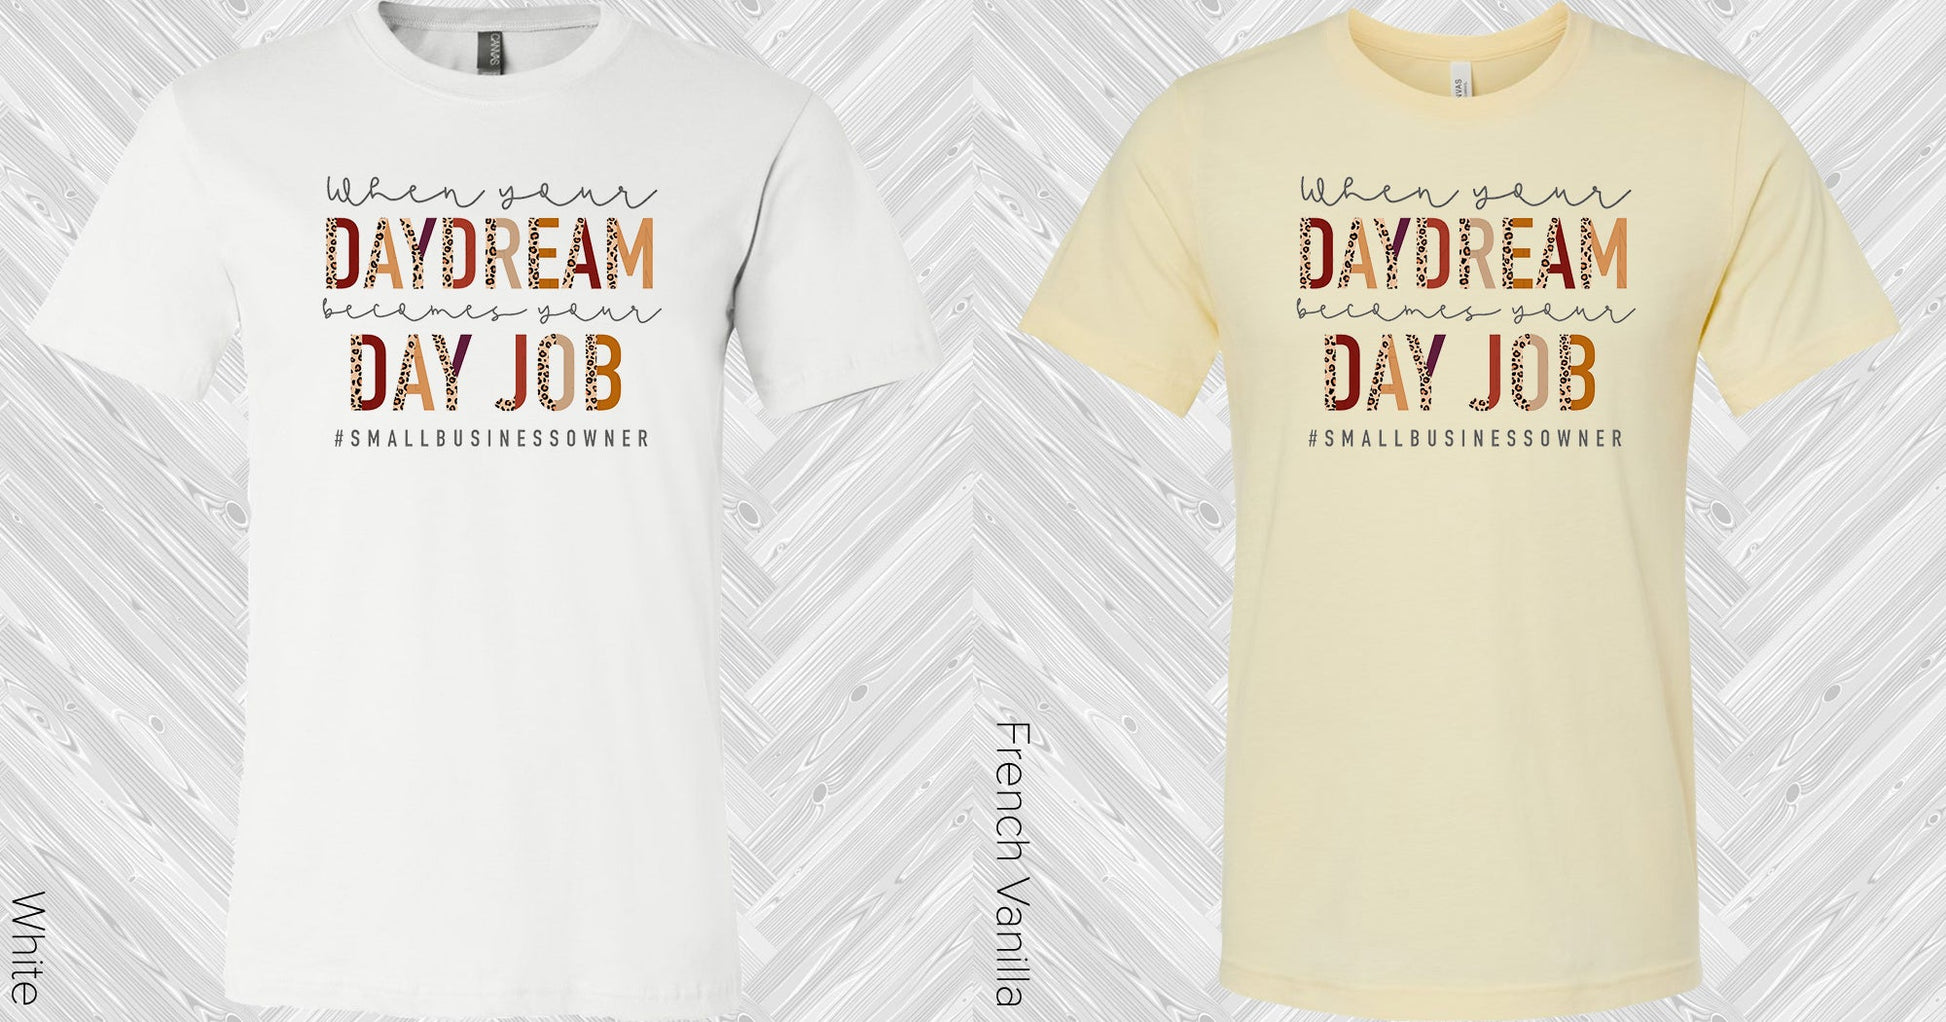 When Your Daydream Because Day Job #smallbusinessowner Graphic Tee Graphic Tee